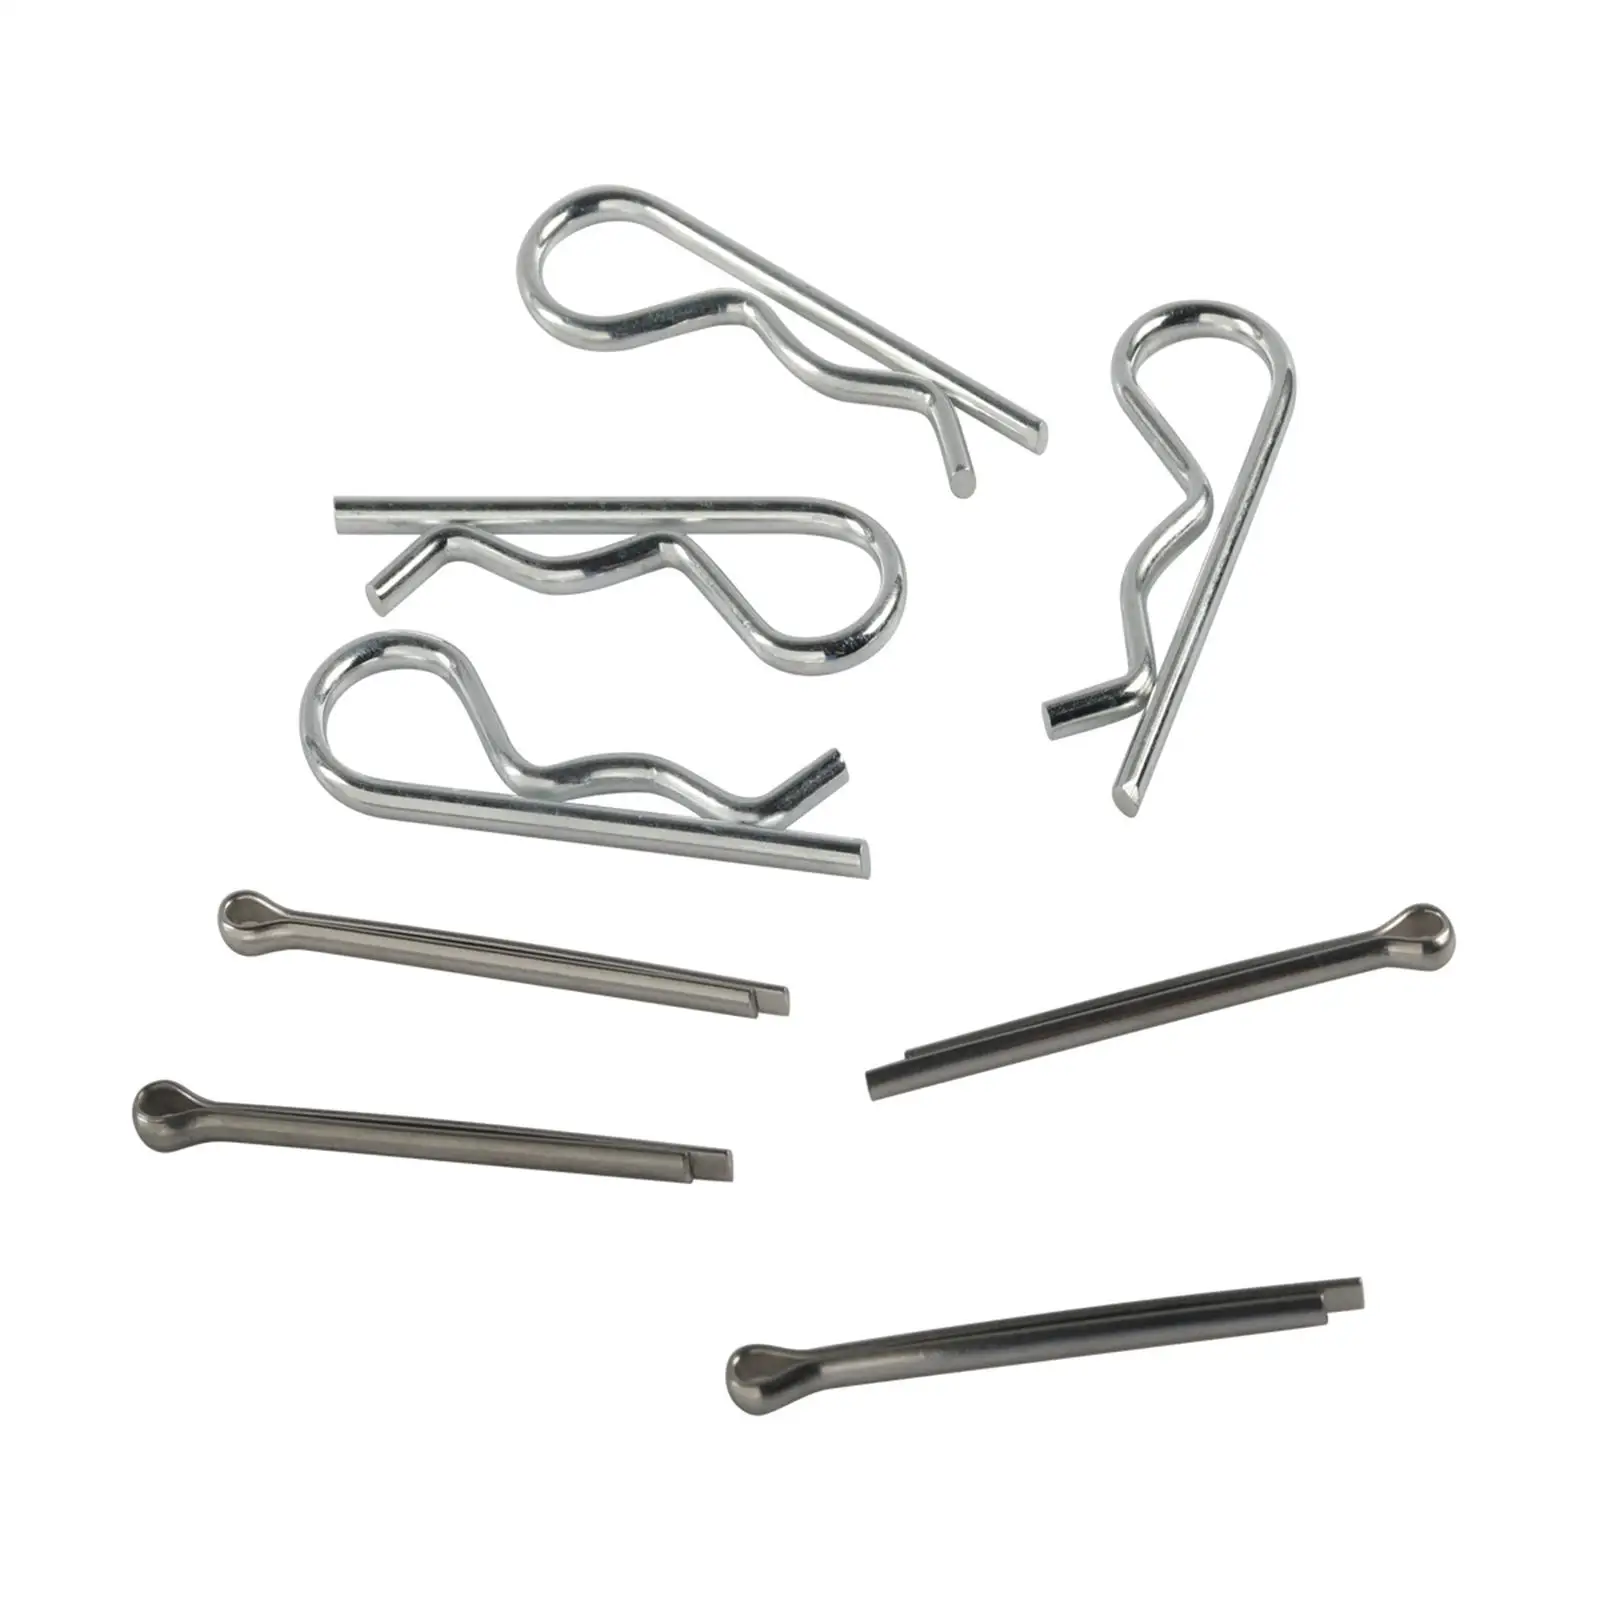 250 Pieces Cotter Pin Spring Fastener Kit for Tractors Carts Tow Bar